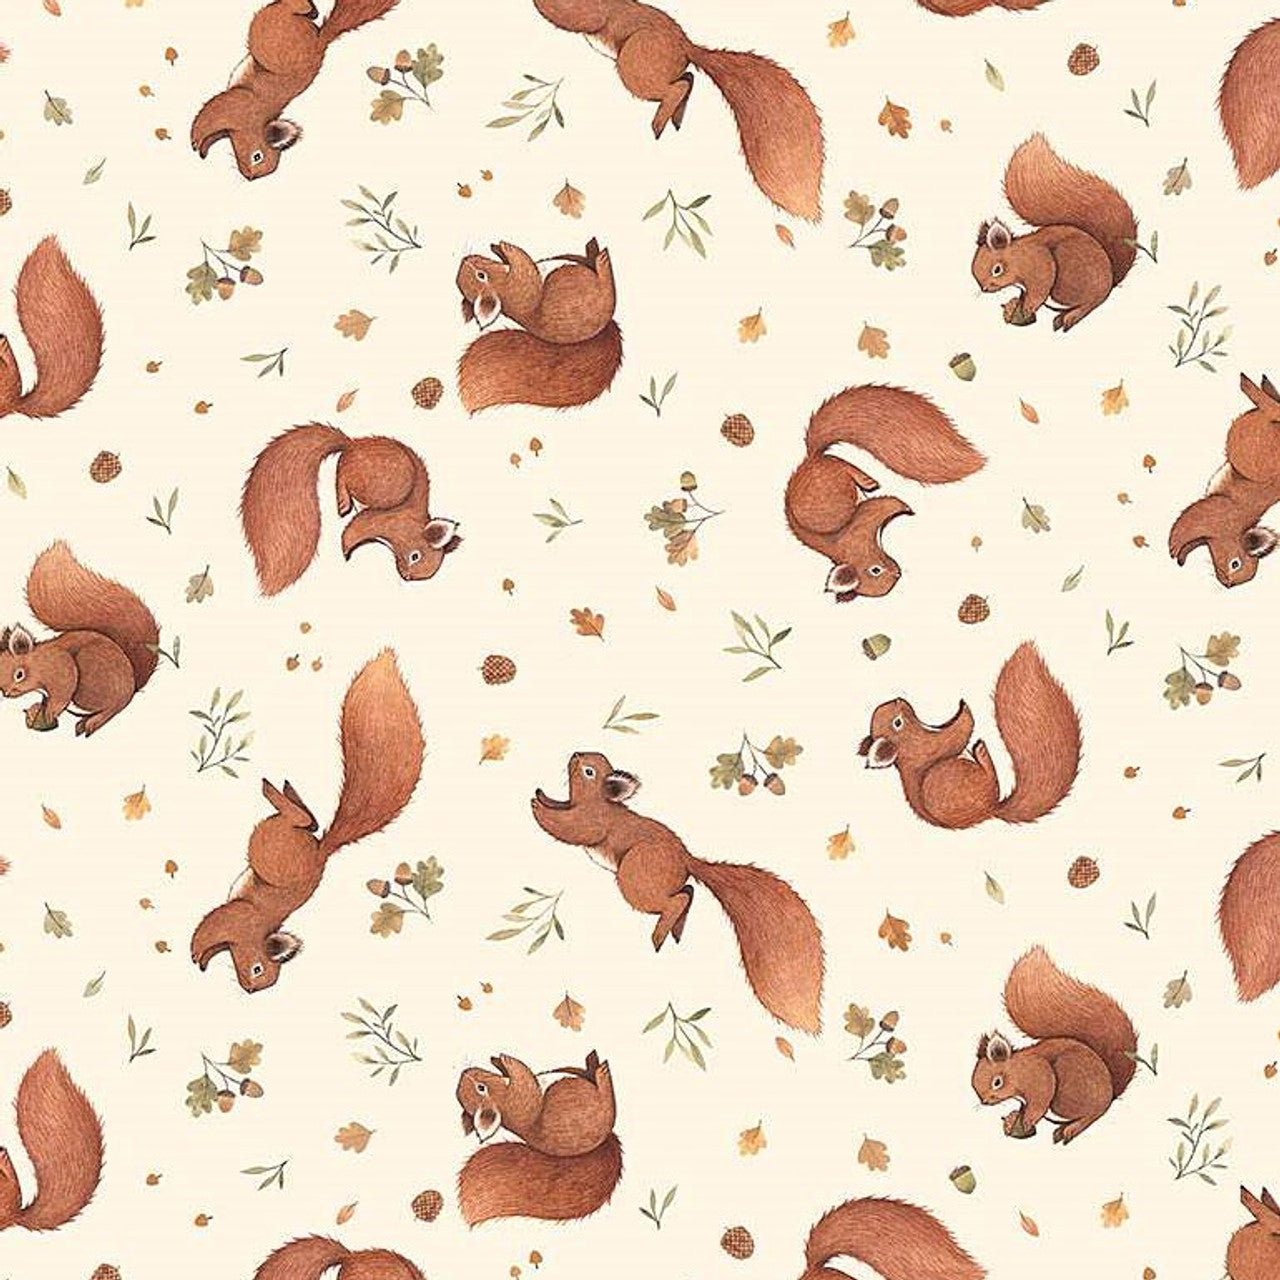 Little Fawns and Friends Squirrels